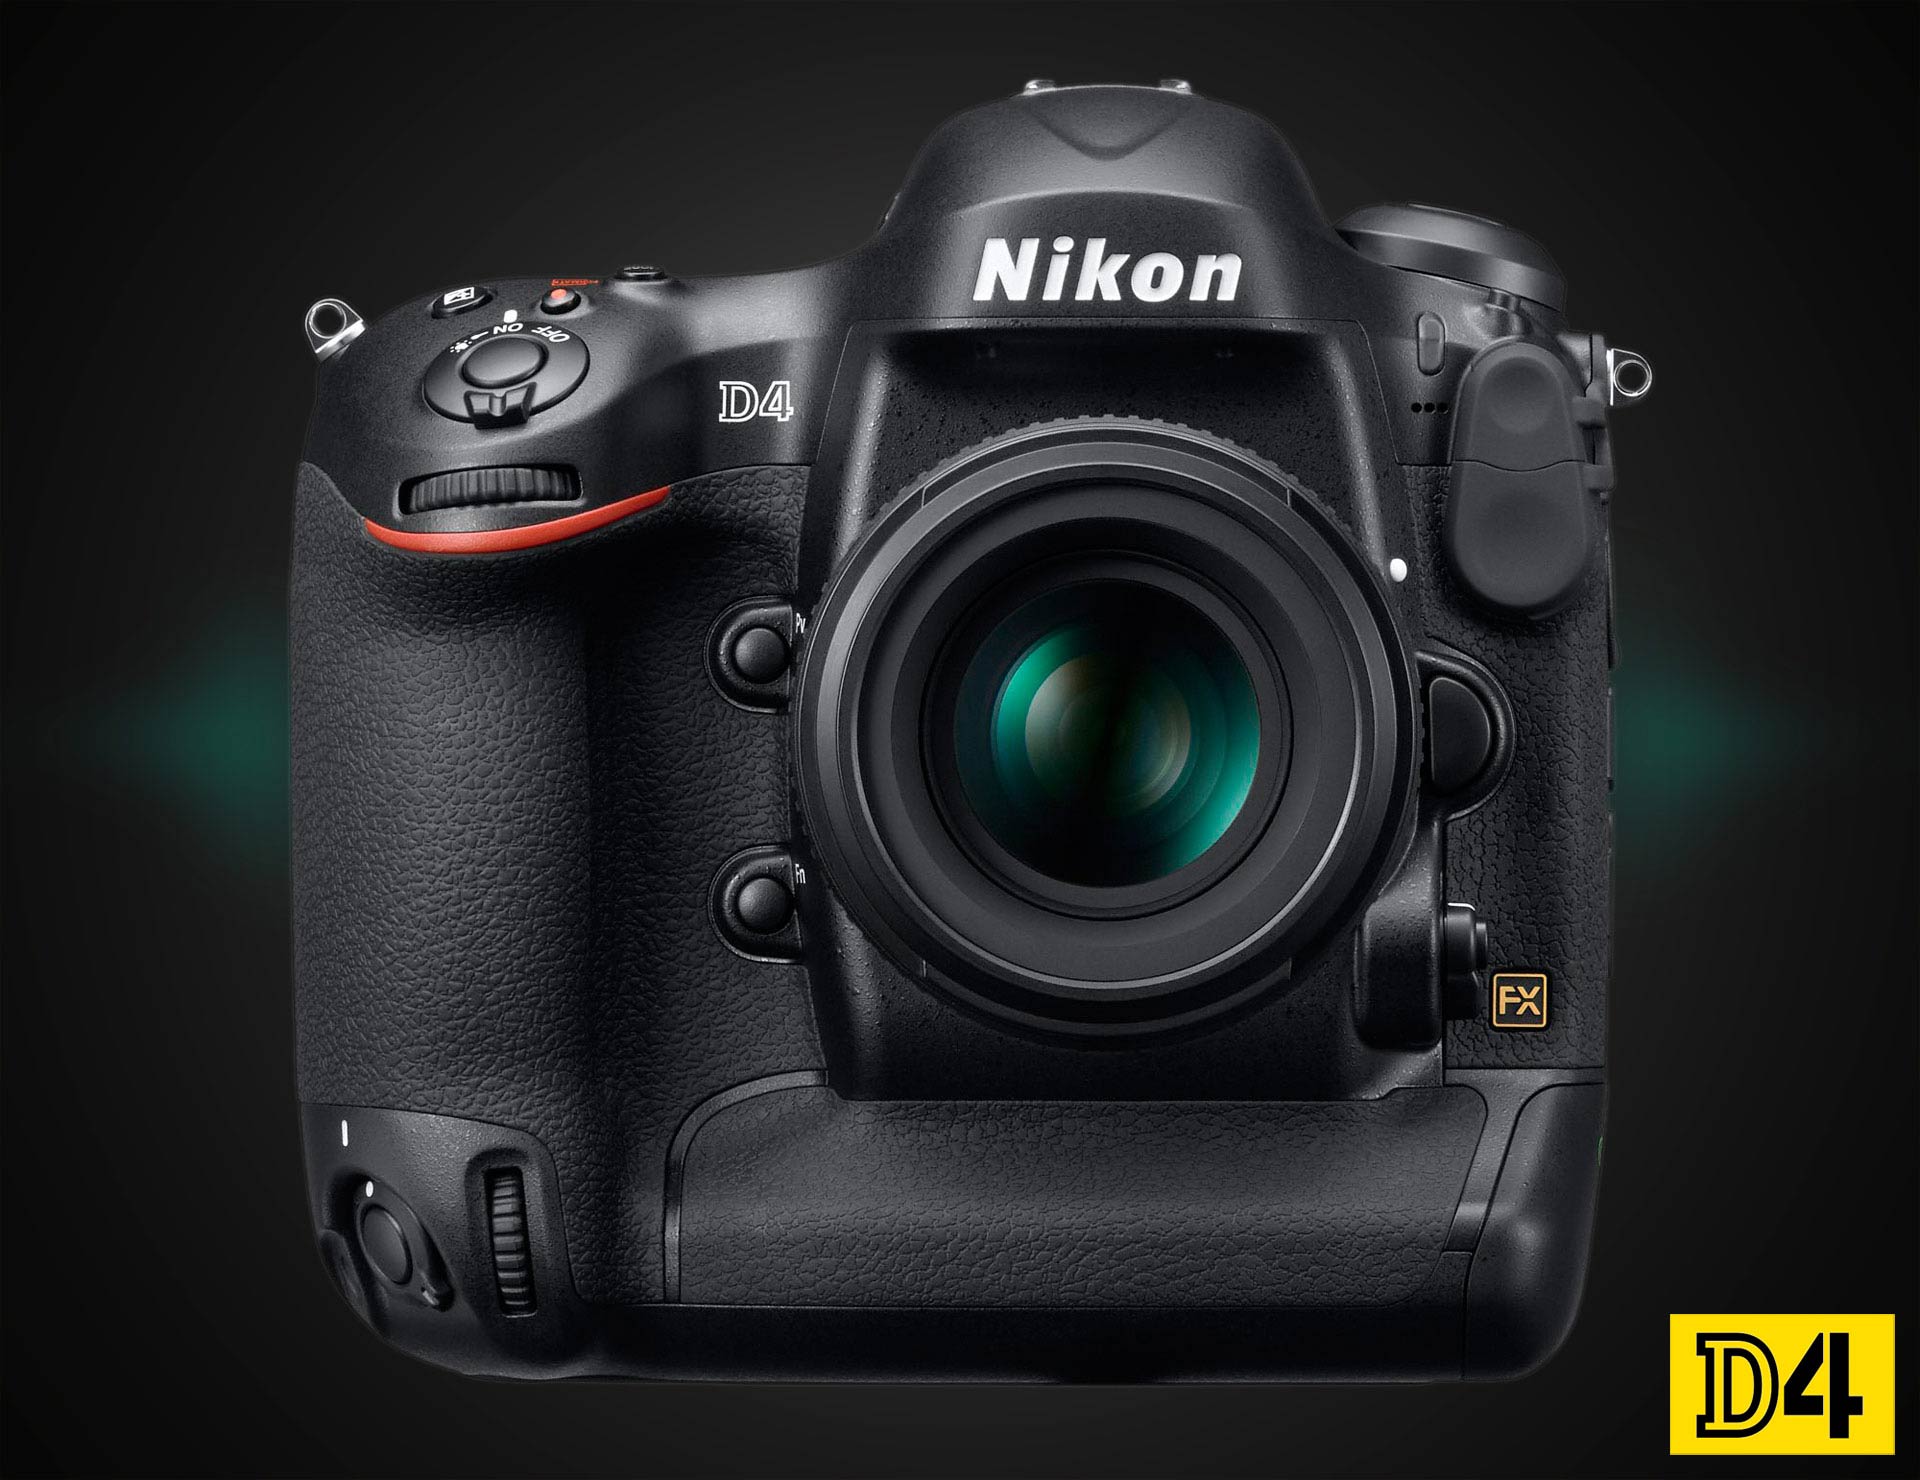 Nikon D4 Front View with 50mm f/1.4 lens